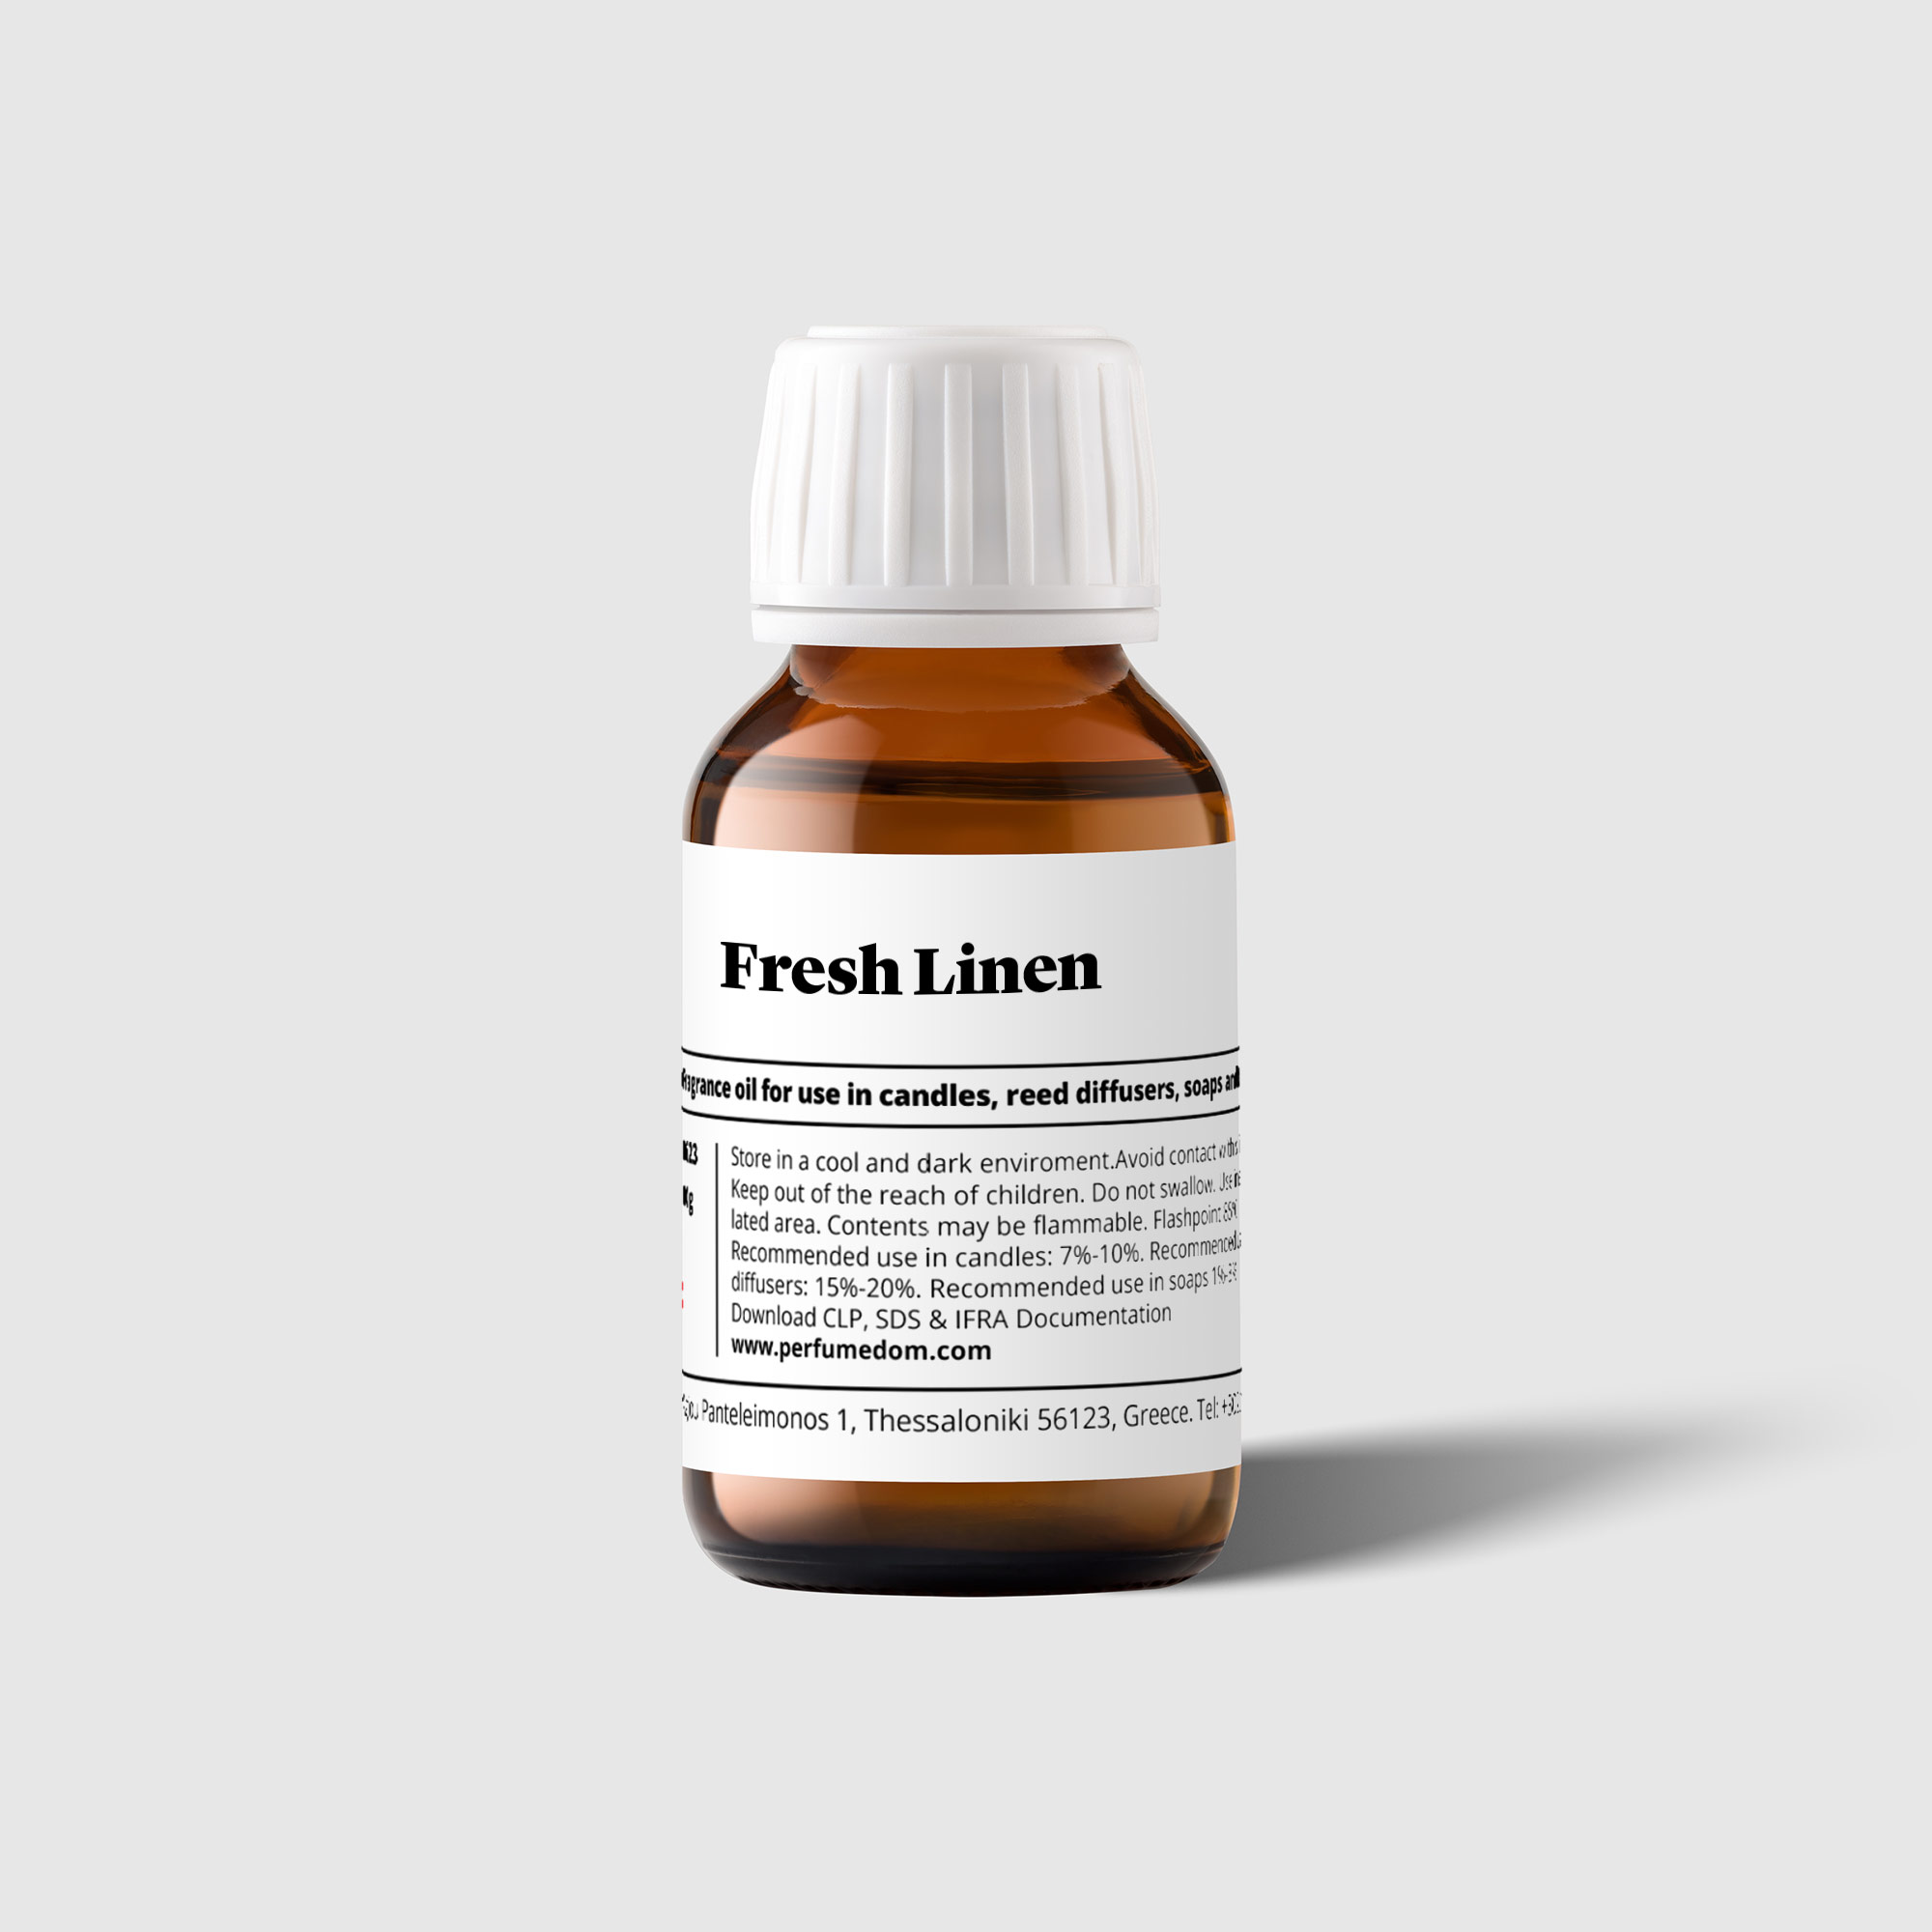 FRESH LINEN FRAGRANCE OIL – Ambience Home (Surrey)